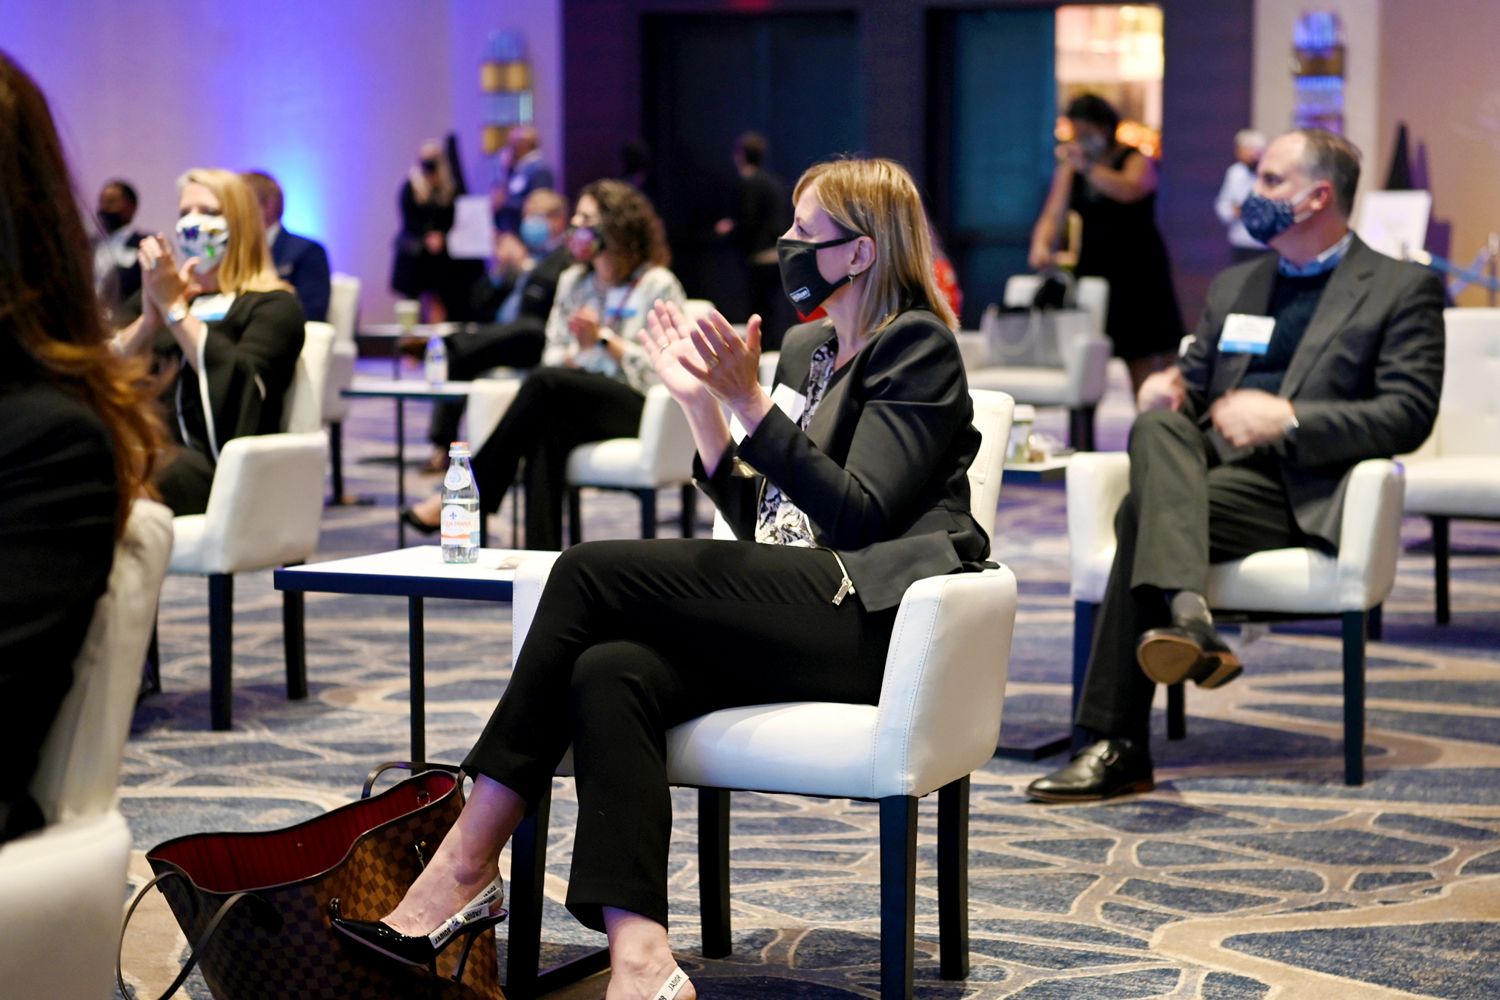 The future of meetings and events, according to Hilton Hotelier